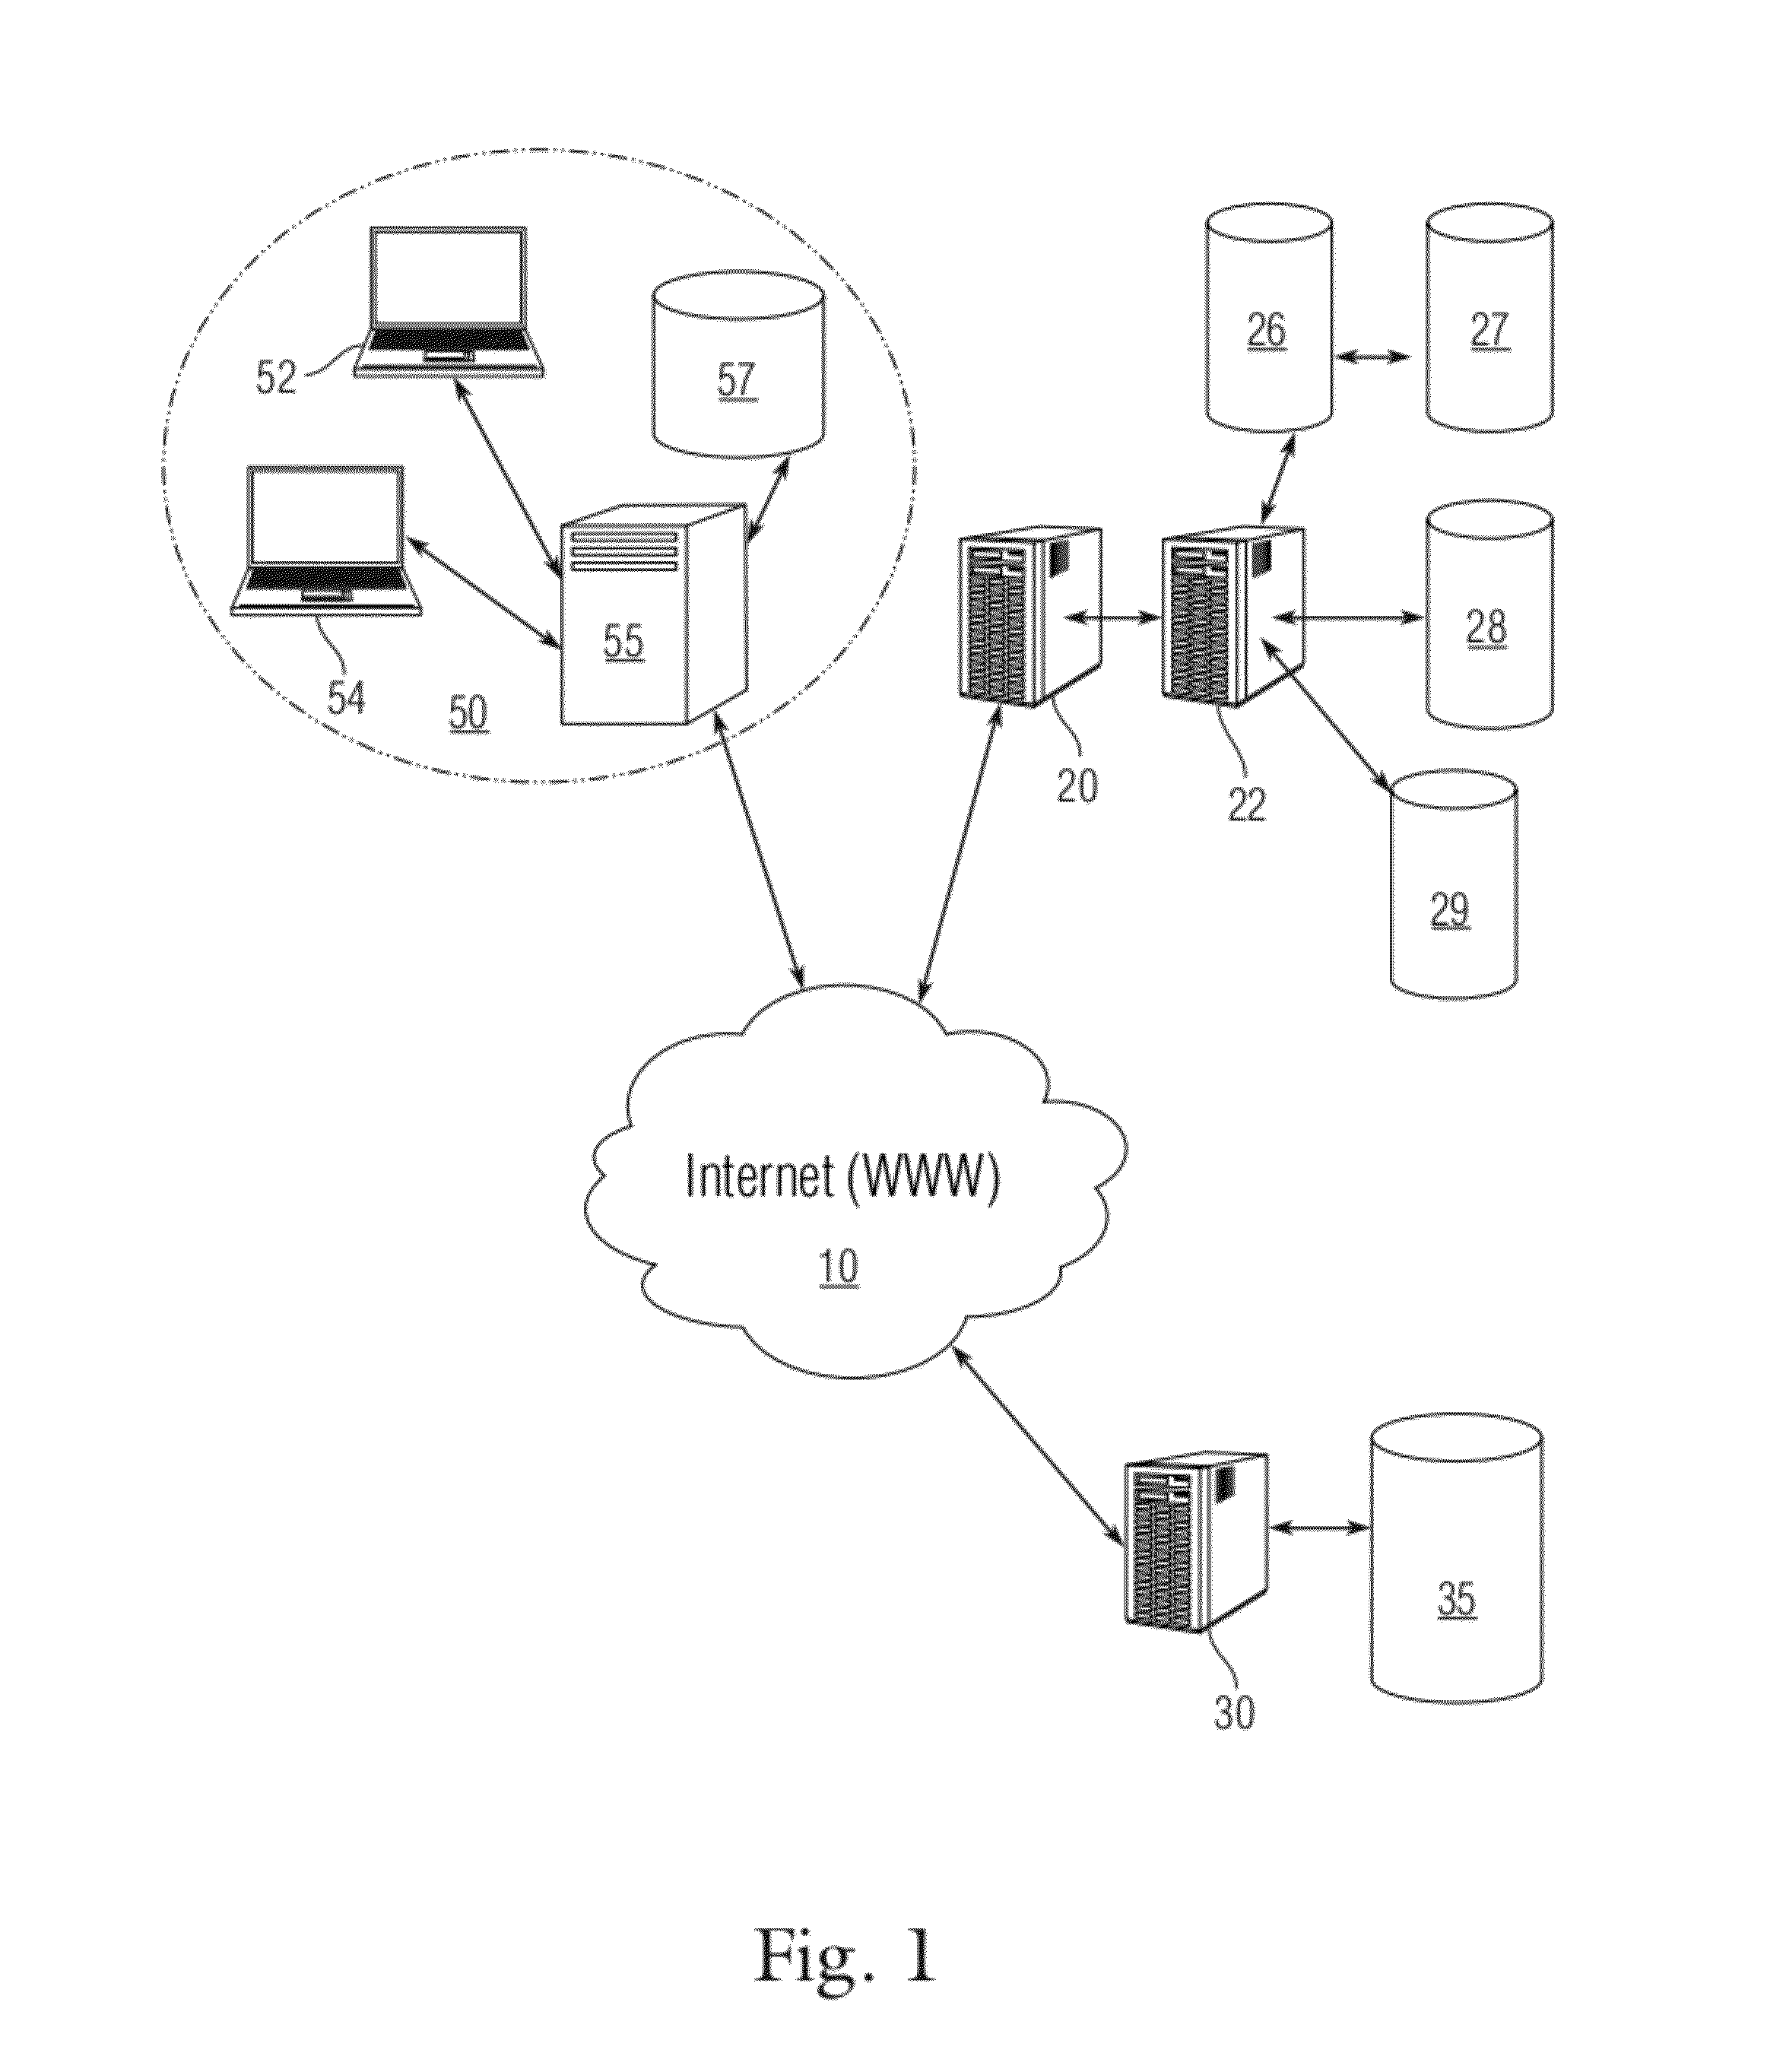 System and methods for an intelligent medical practice system employing a learning knowledge base